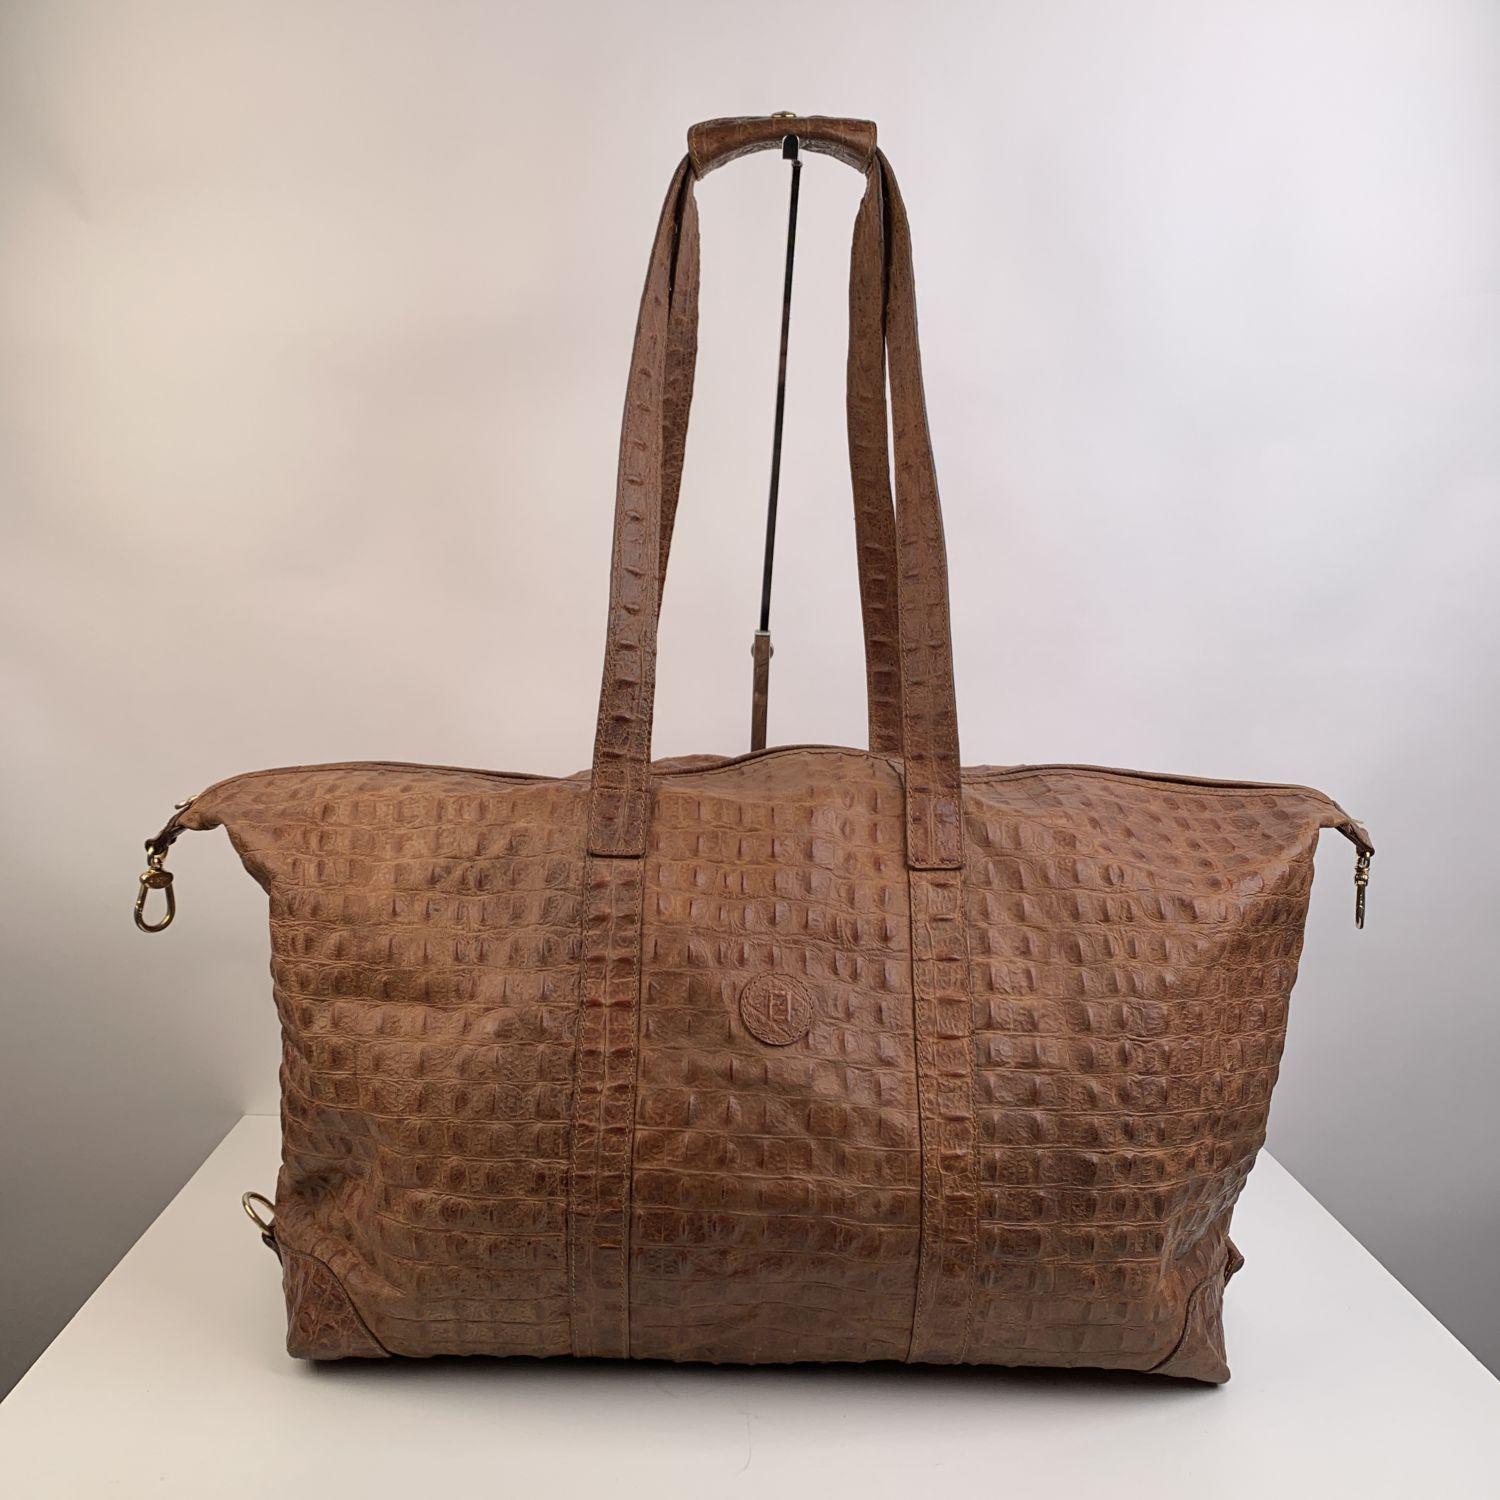 Vintage Fendi embossed croc look Fendi Travel bag / Duffle bag. Light brown leather. FF - FENDI logo patch on the front. Double shoulder strap. Upper zipper closure. 1 side zip pocket inside. 'FENDI s.a.s. Roma - made in Italy' tag